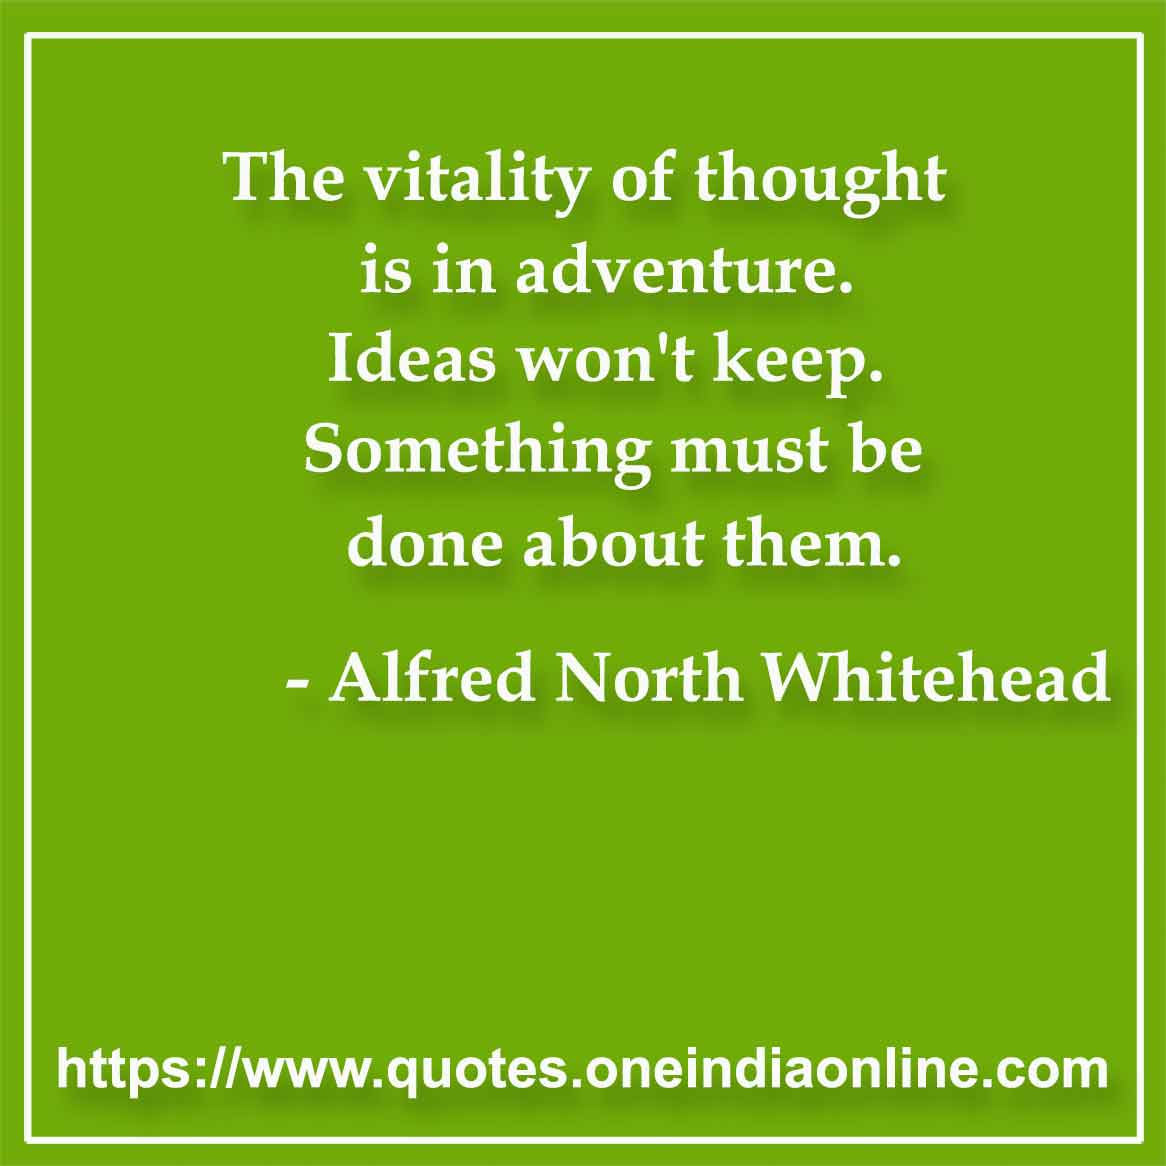 The vitality of thought is in adventure. Ideas won't keep. Something must be done about them.

- Idea Quotes by Alfred North Whitehead